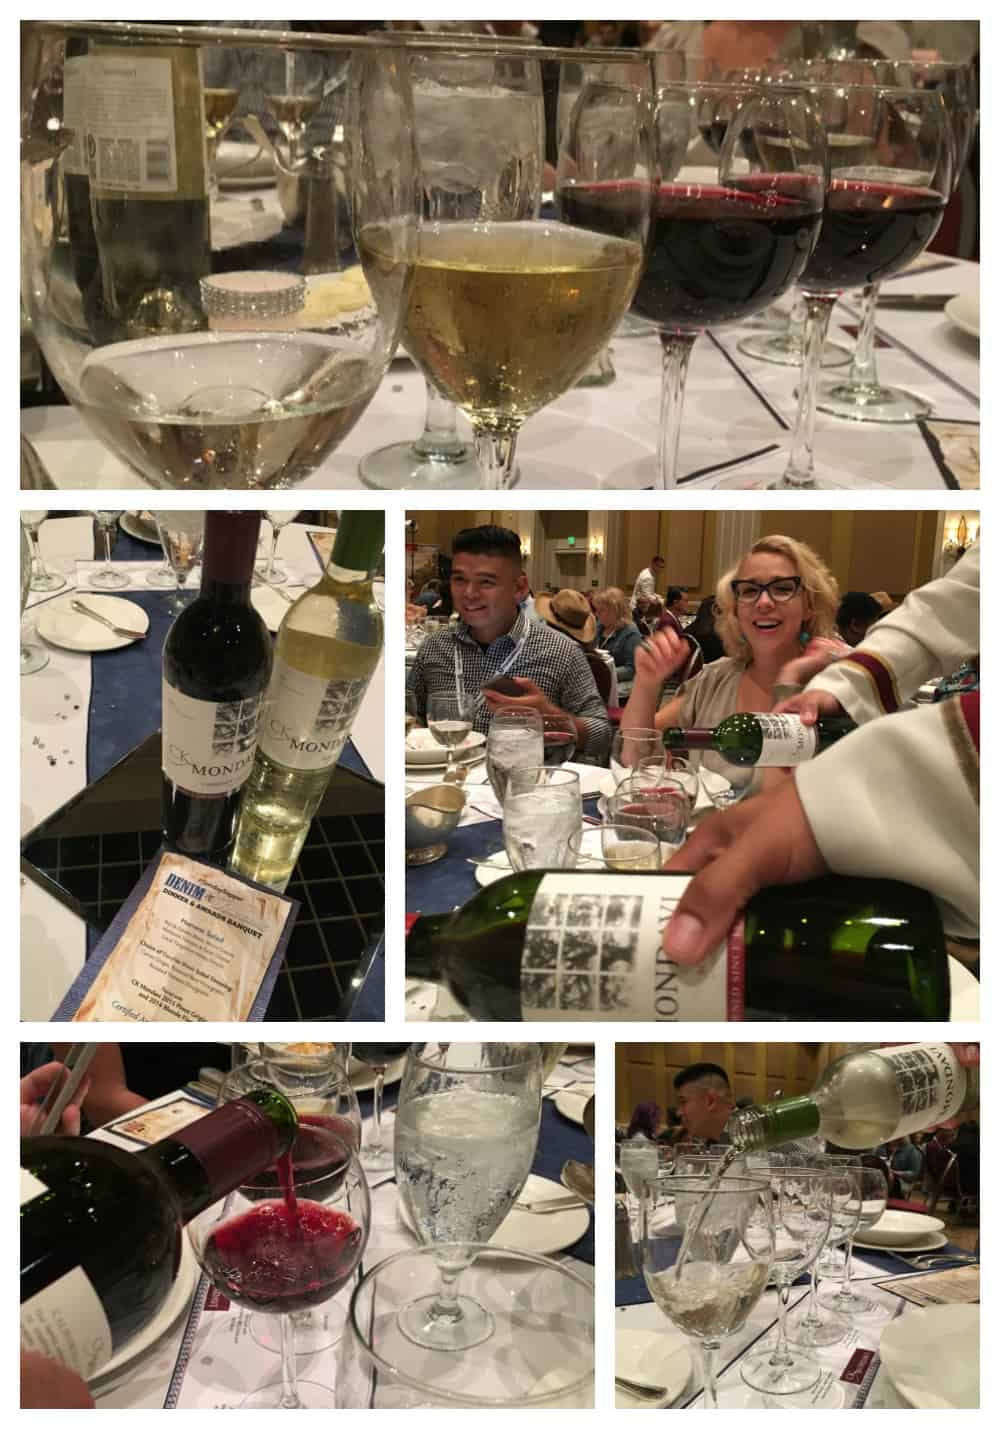 How to Succeed at #FWCon Without Really Trying| Recap - Drink #FWCon